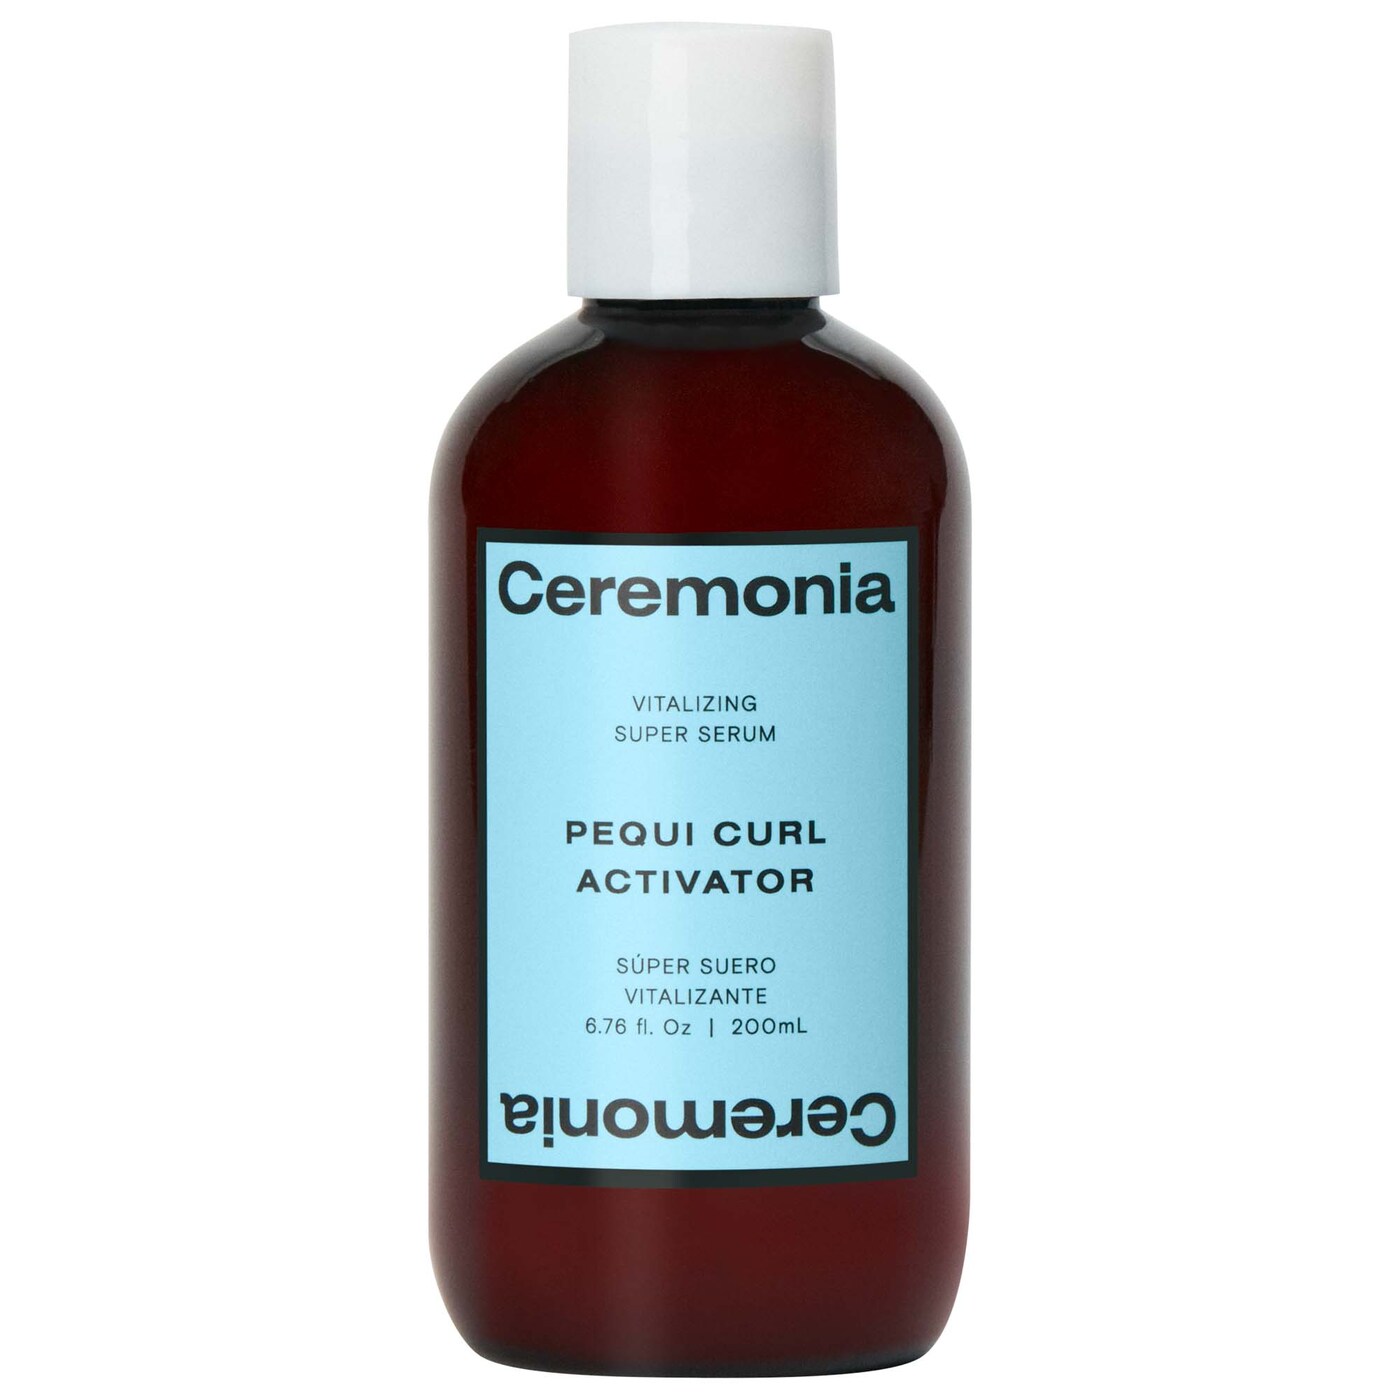 ceremonia pequi curl activator, one of the best serums for dry hair